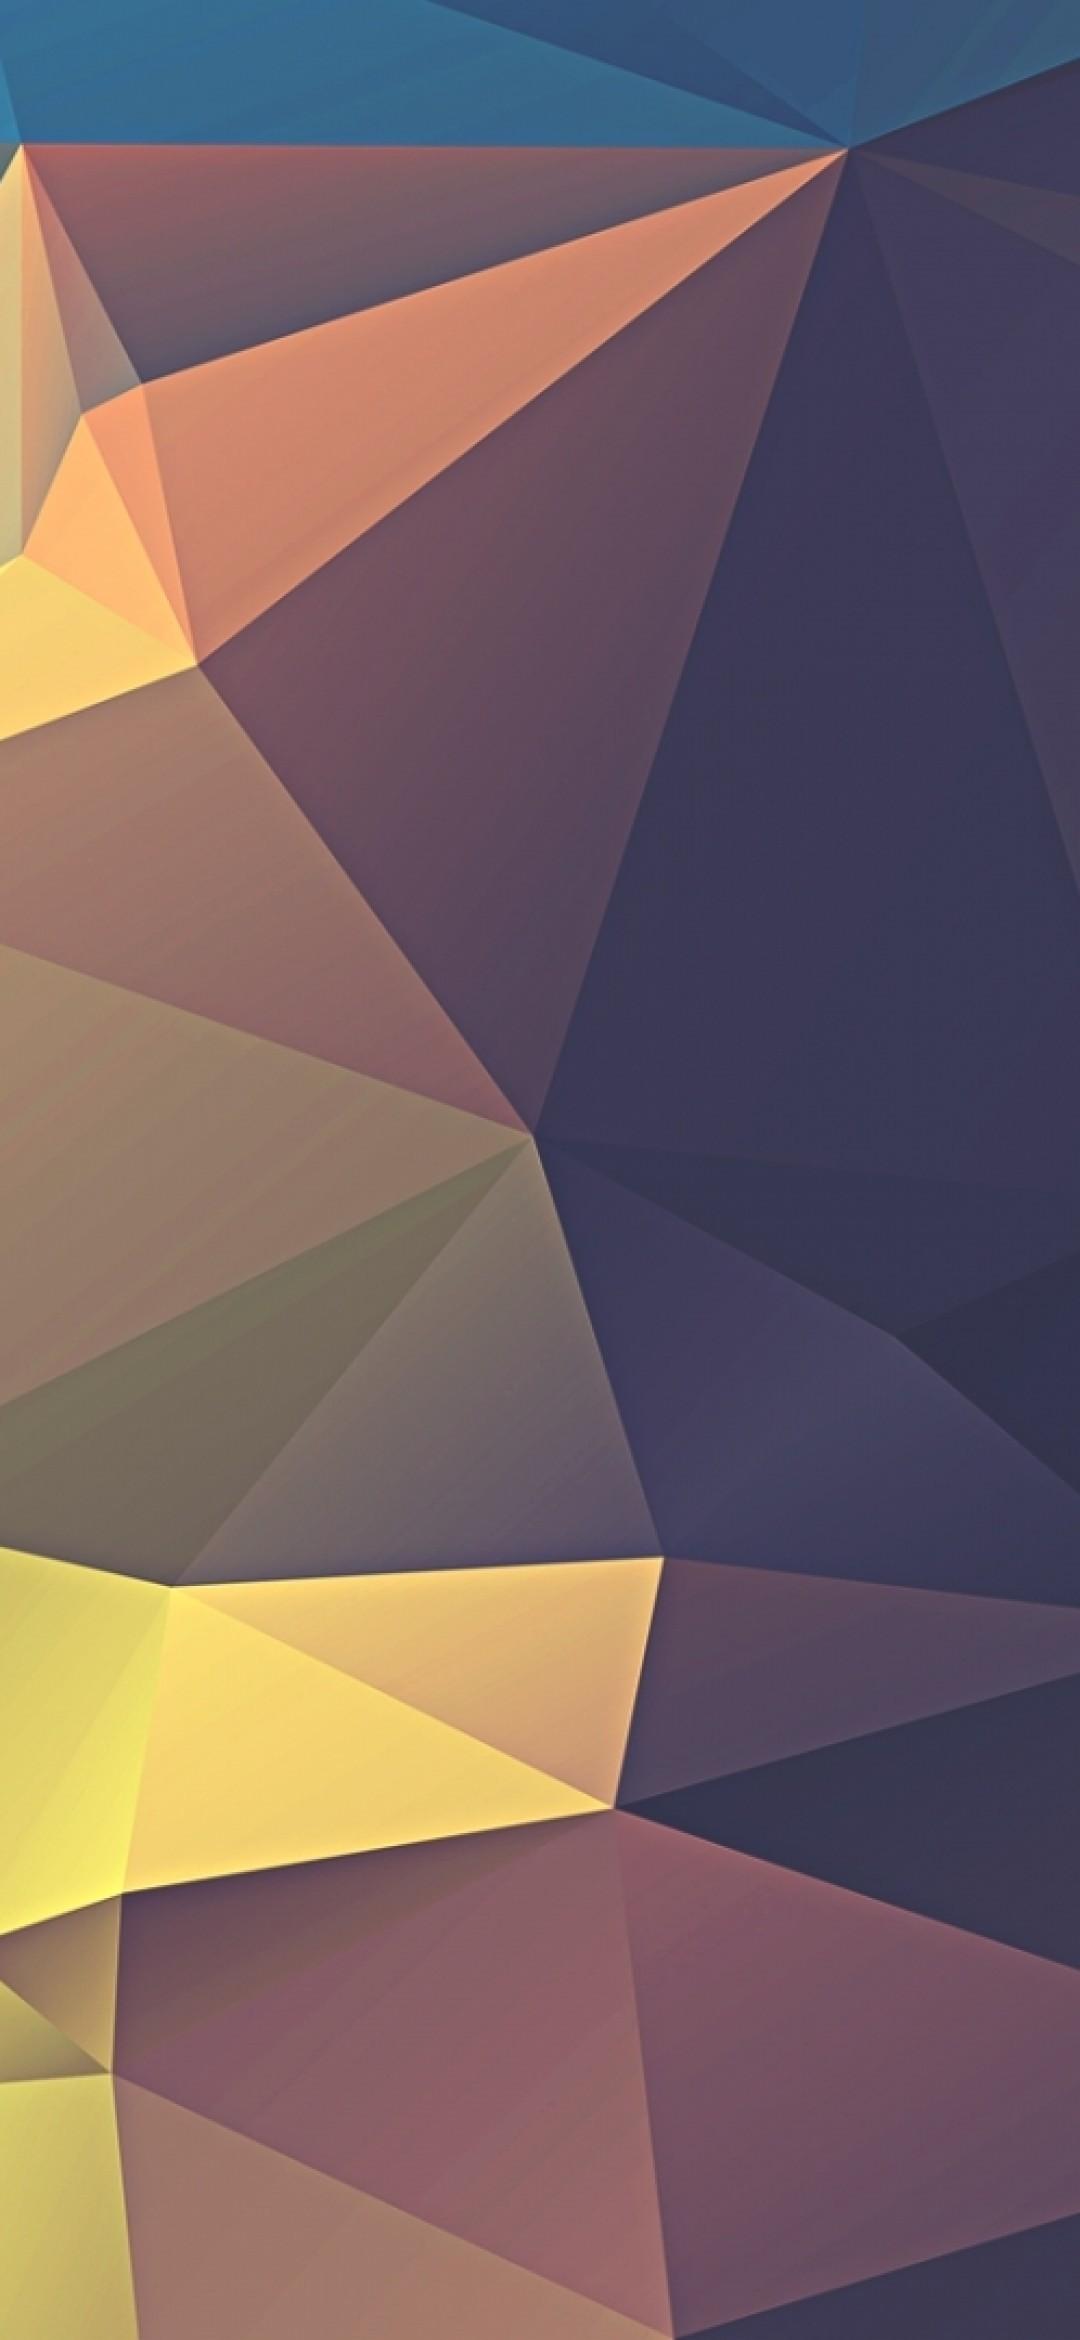 Download 1080x2340 Low Poly, Triangles, Texture, Minimalism